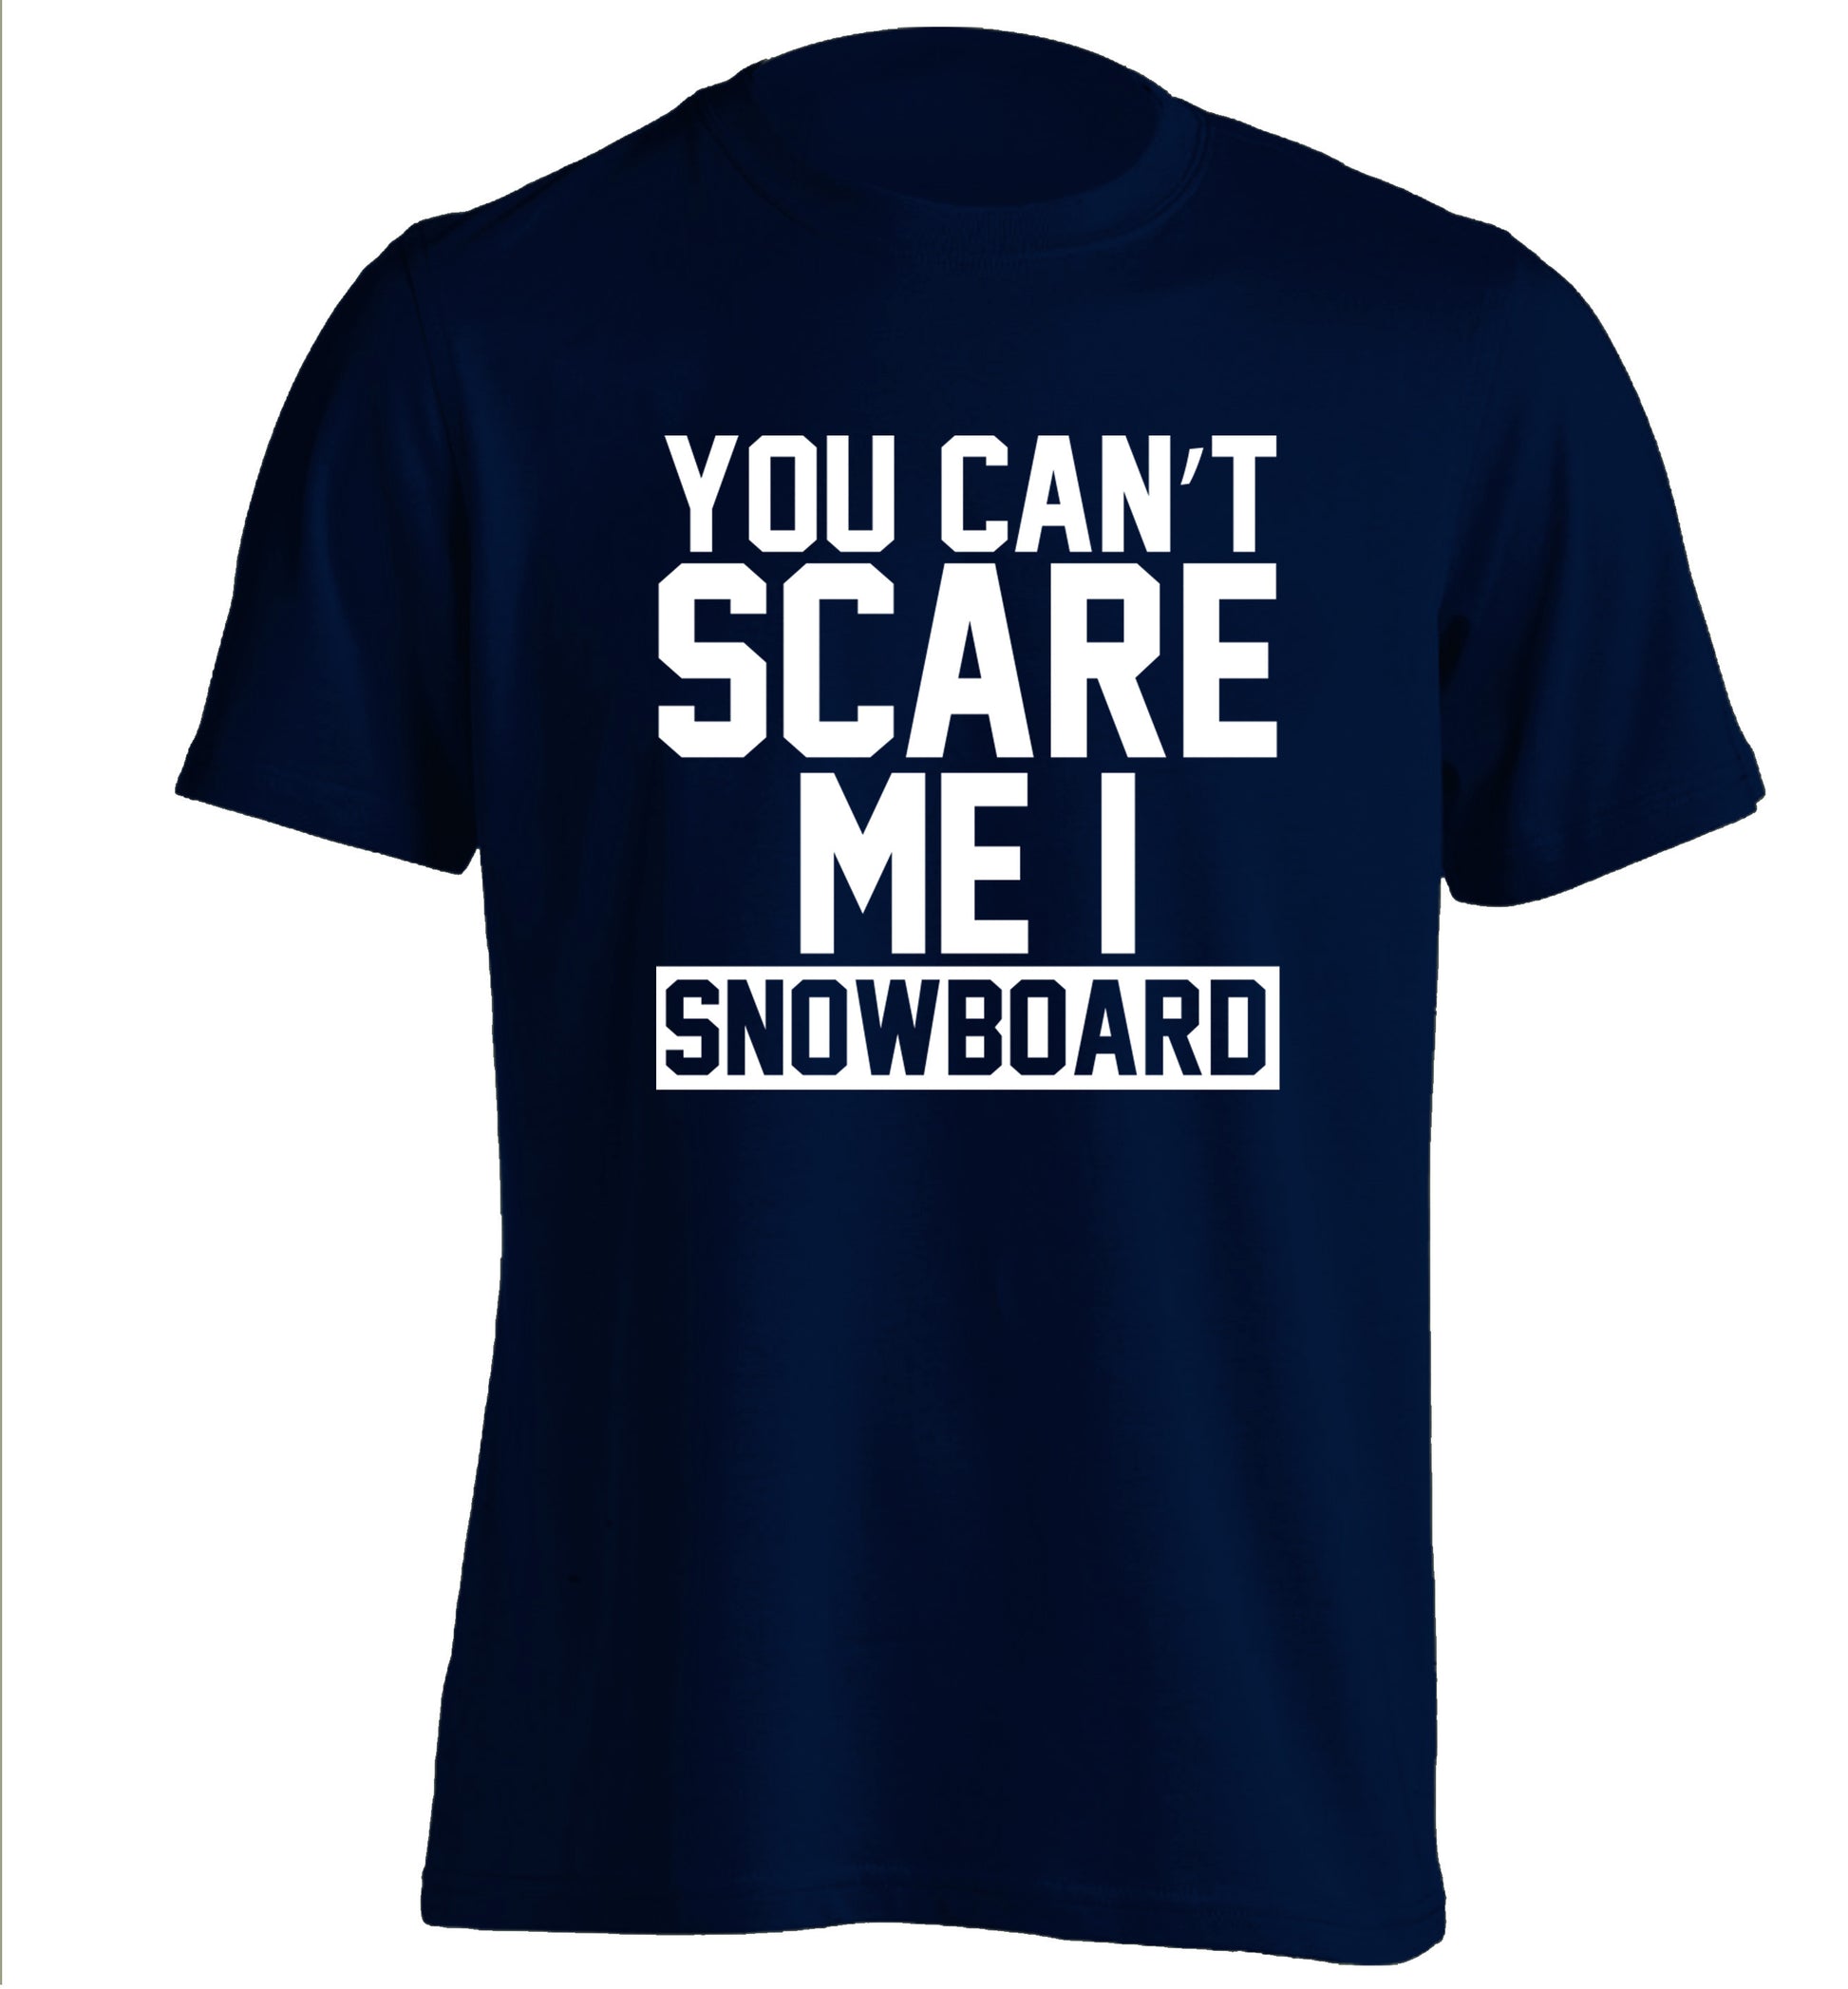 You can't scare me I snowboard adults unisex navy Tshirt 2XL